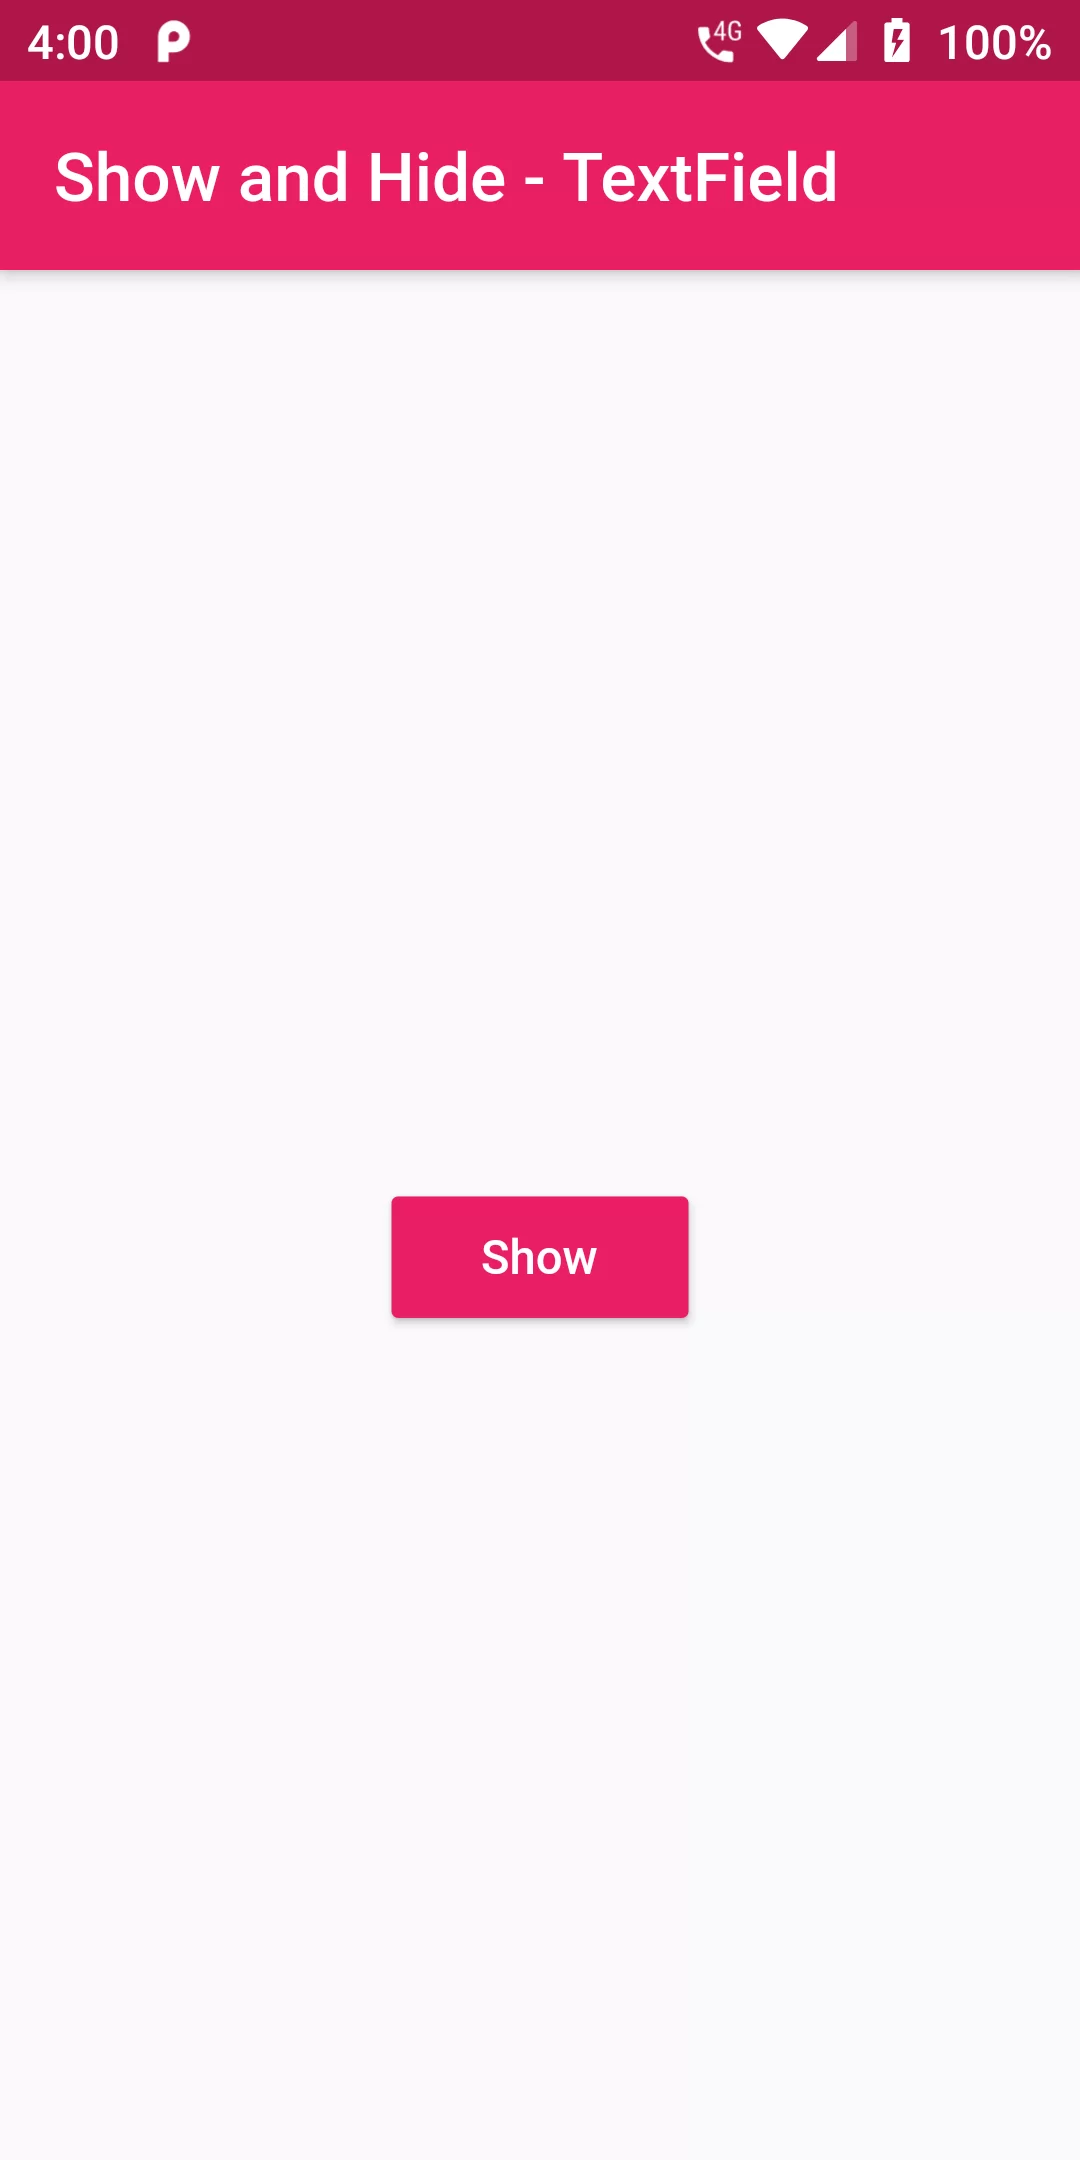 How To Show And Hide Text Field Input Using Flutter